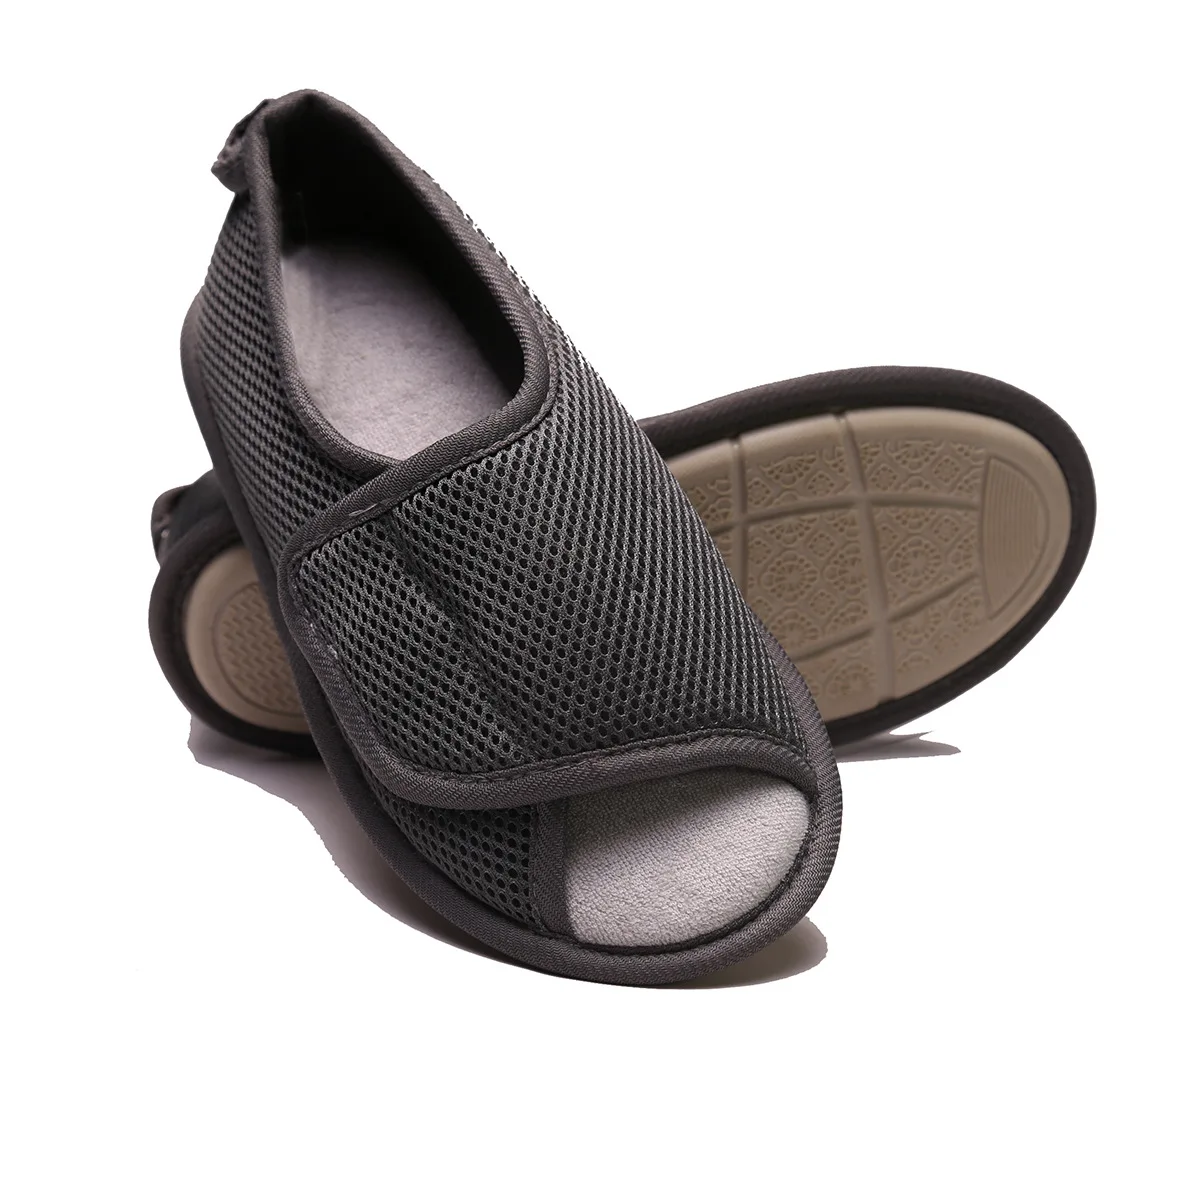 Wholesale Medical Diabetic Shoes Mush Hook and Loop Breathable Cotton Shoes Comfortable From m.alibaba.com